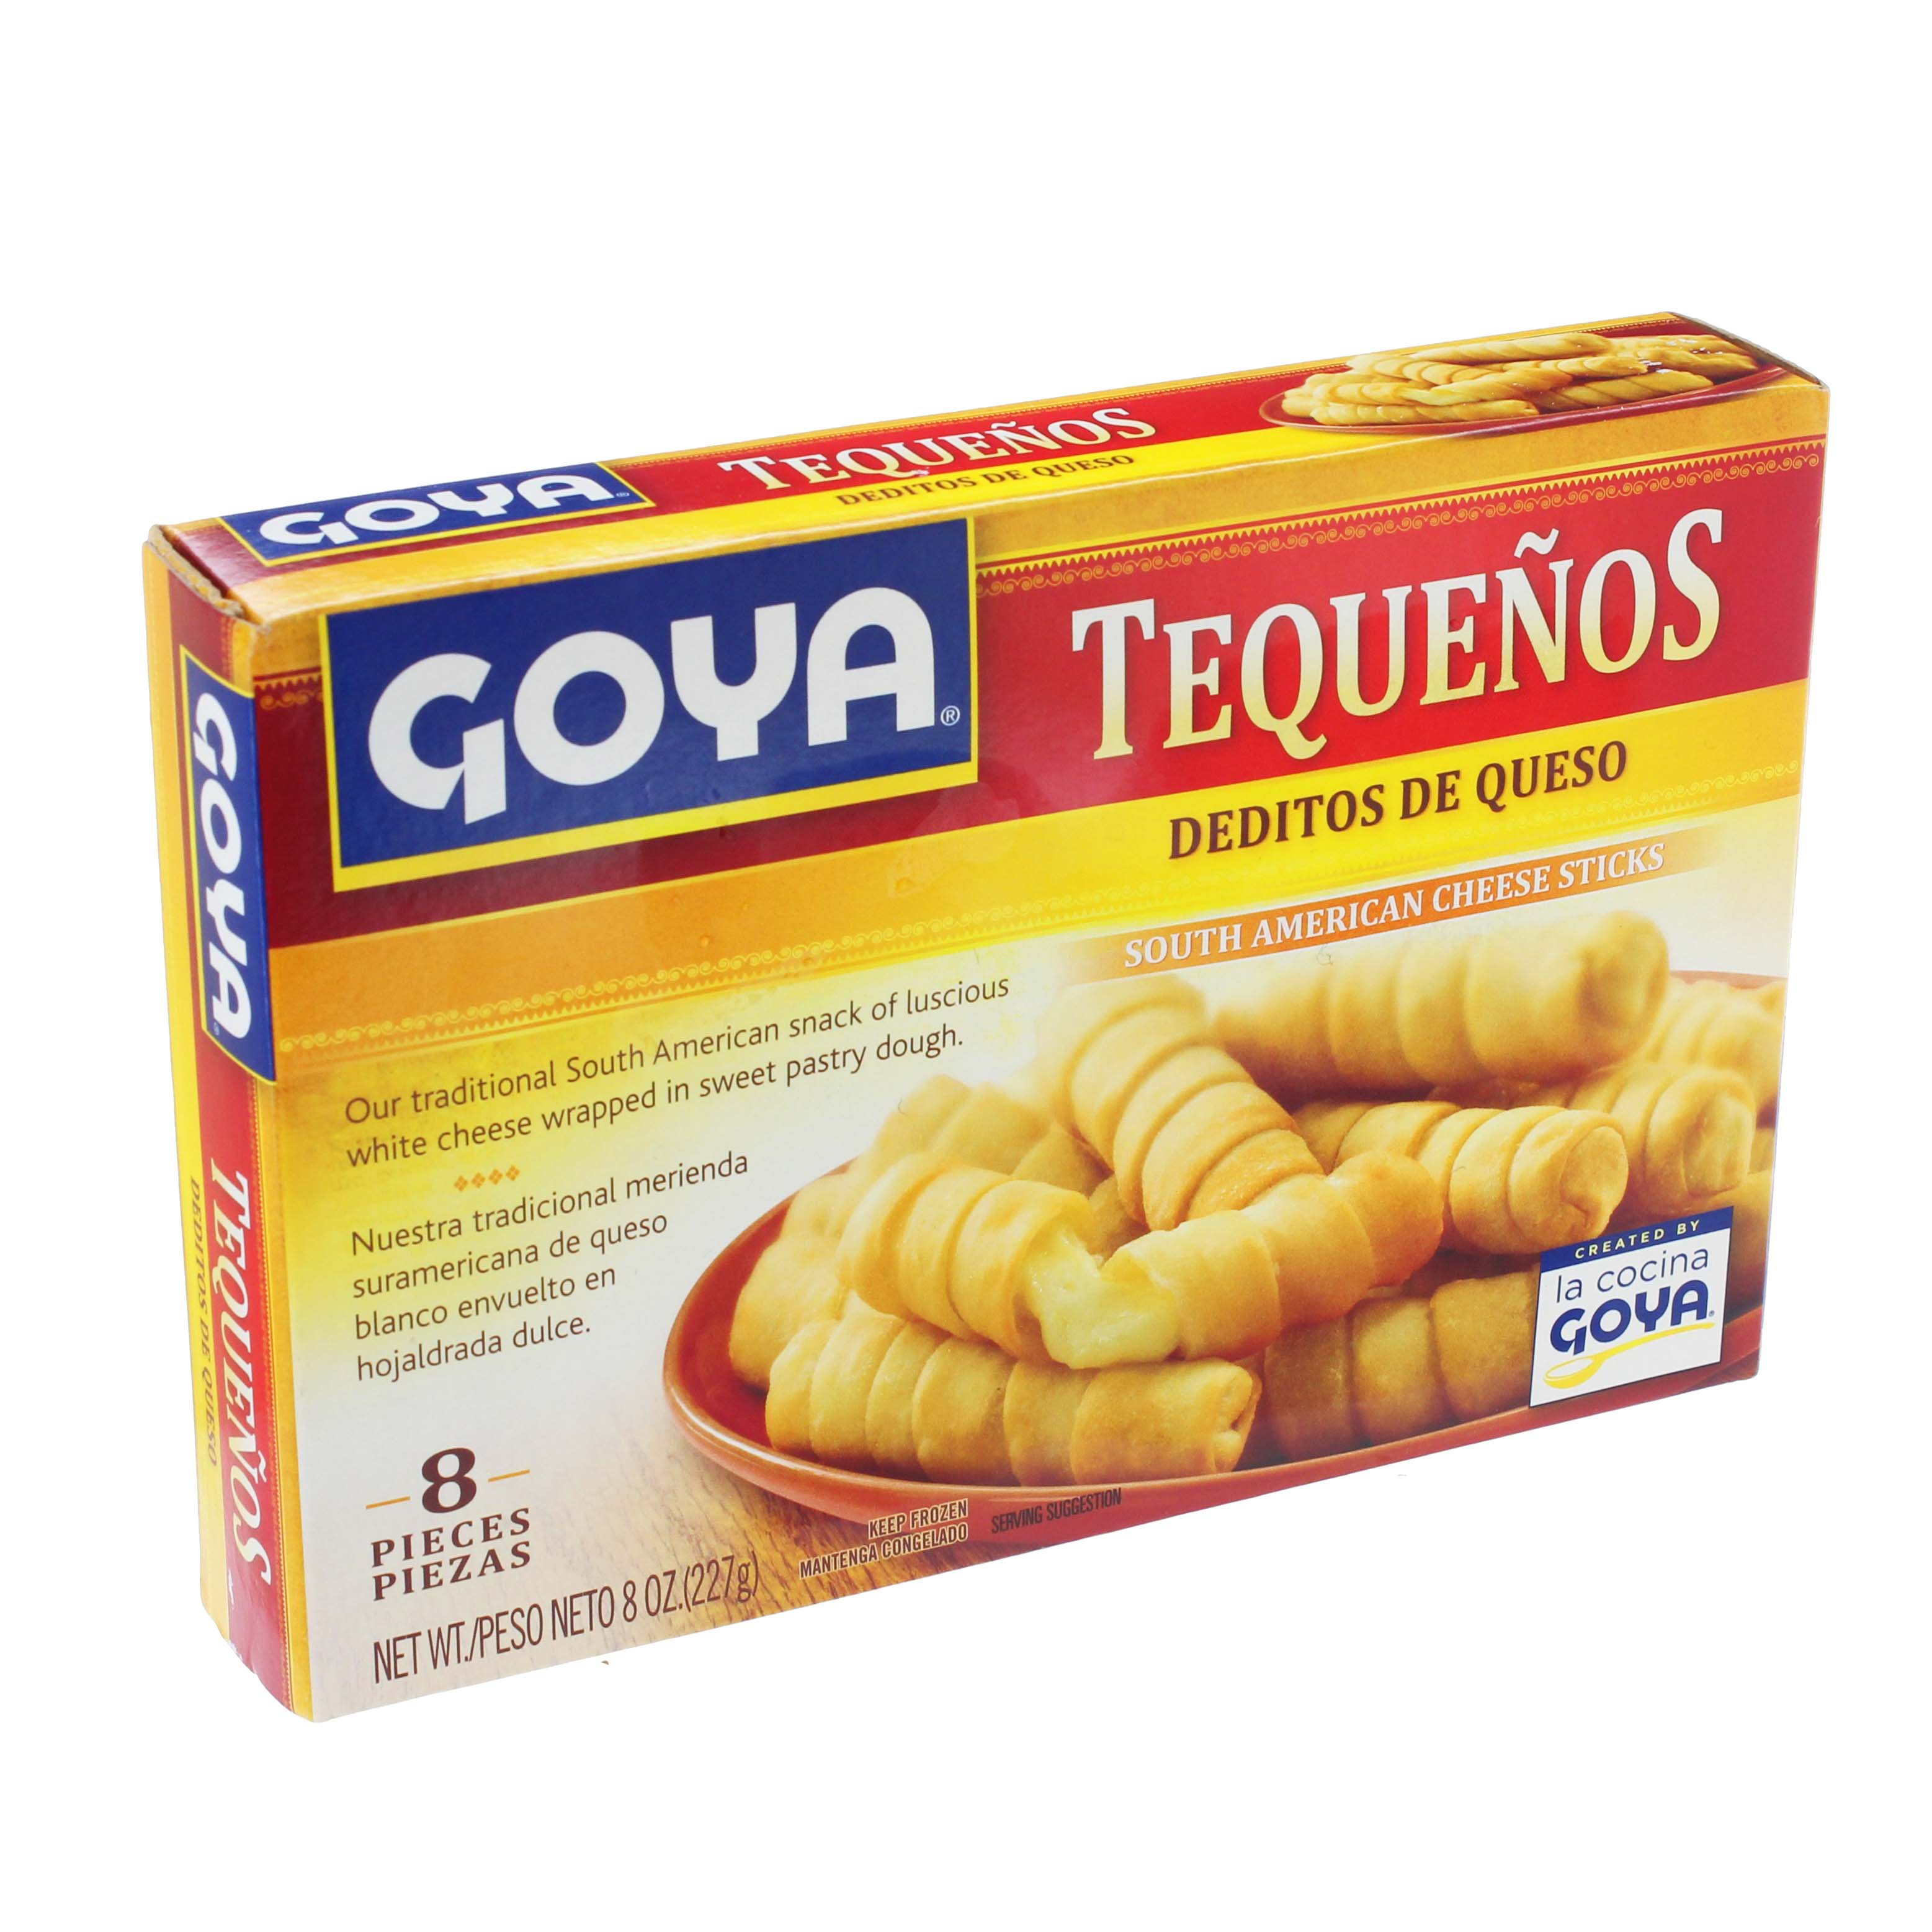 Appetizers Sticks American at Shop South - Tequenos Cheese H-E-B Goya